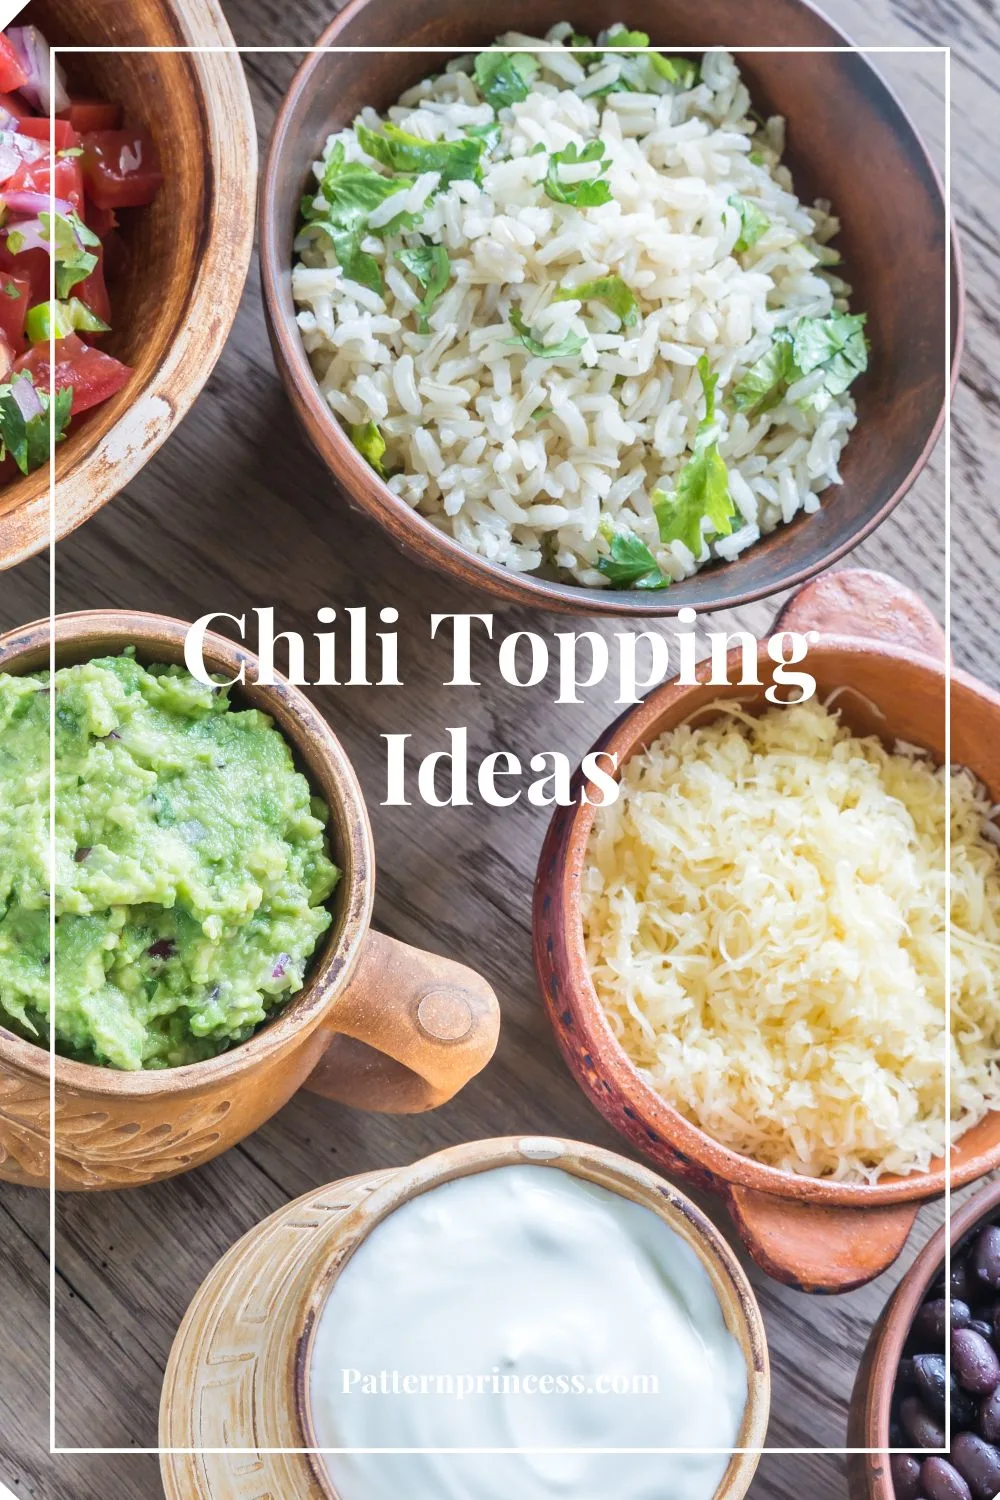 Chili Topping Ideas